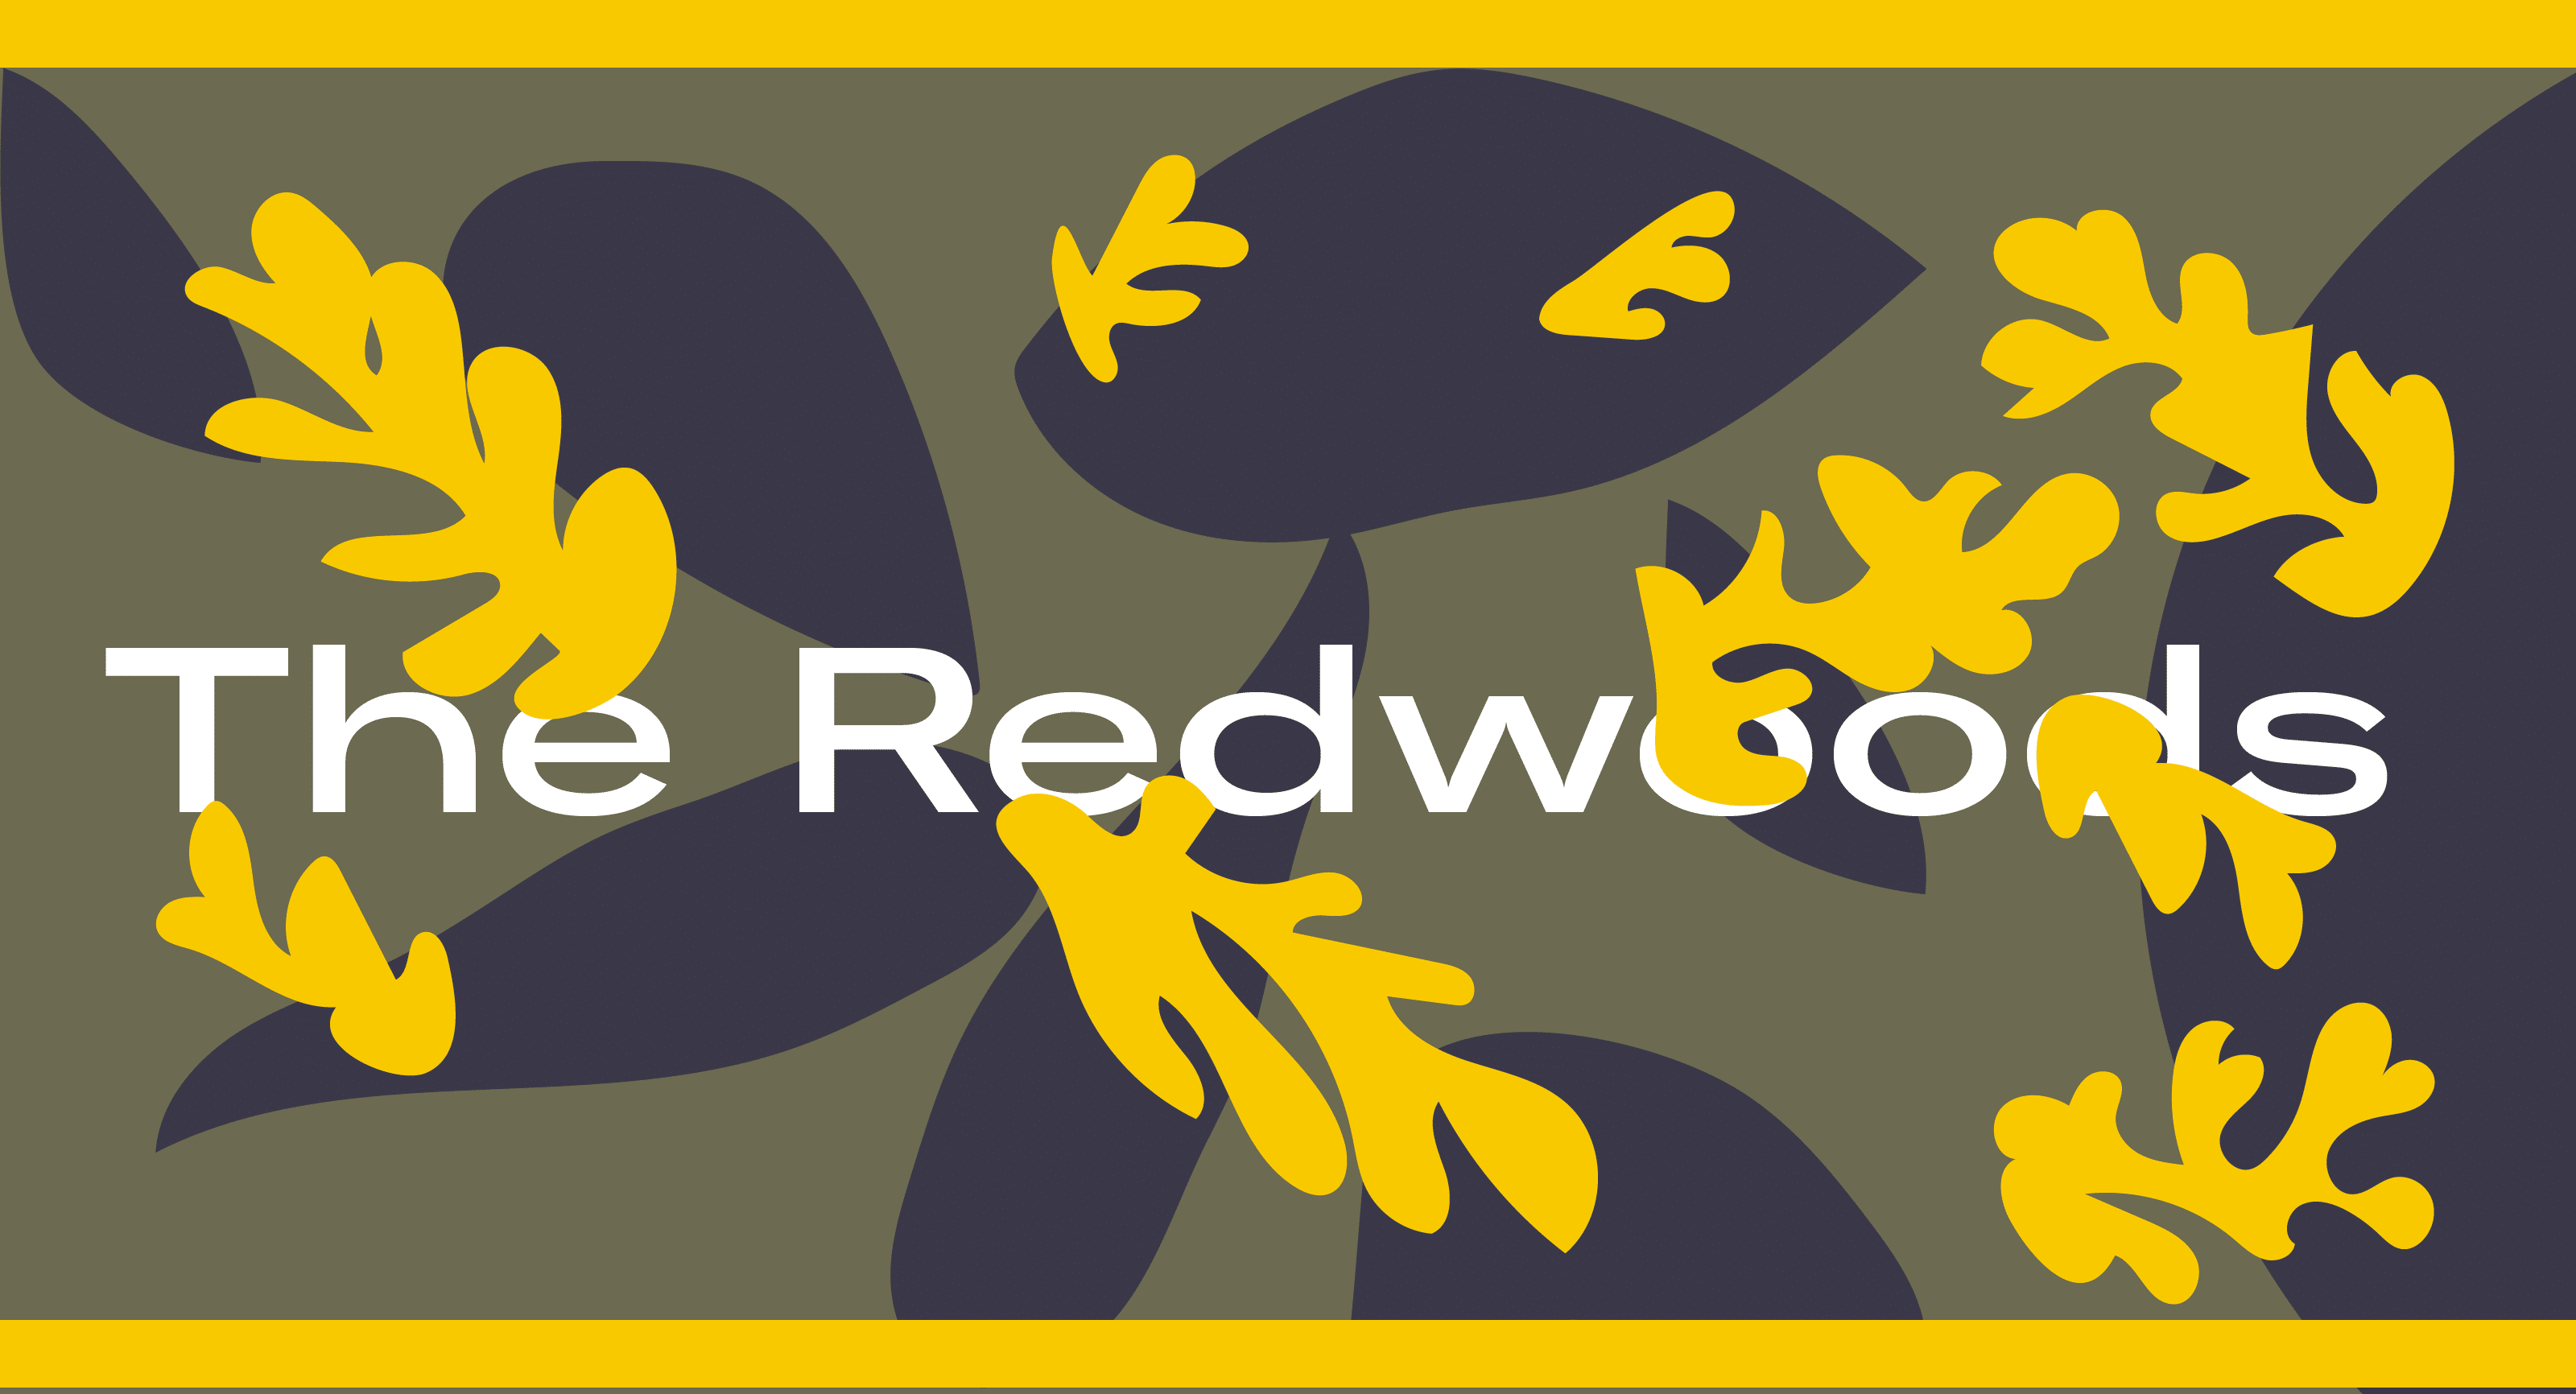 Abstract Illustration with "The Redwoods" written as a title